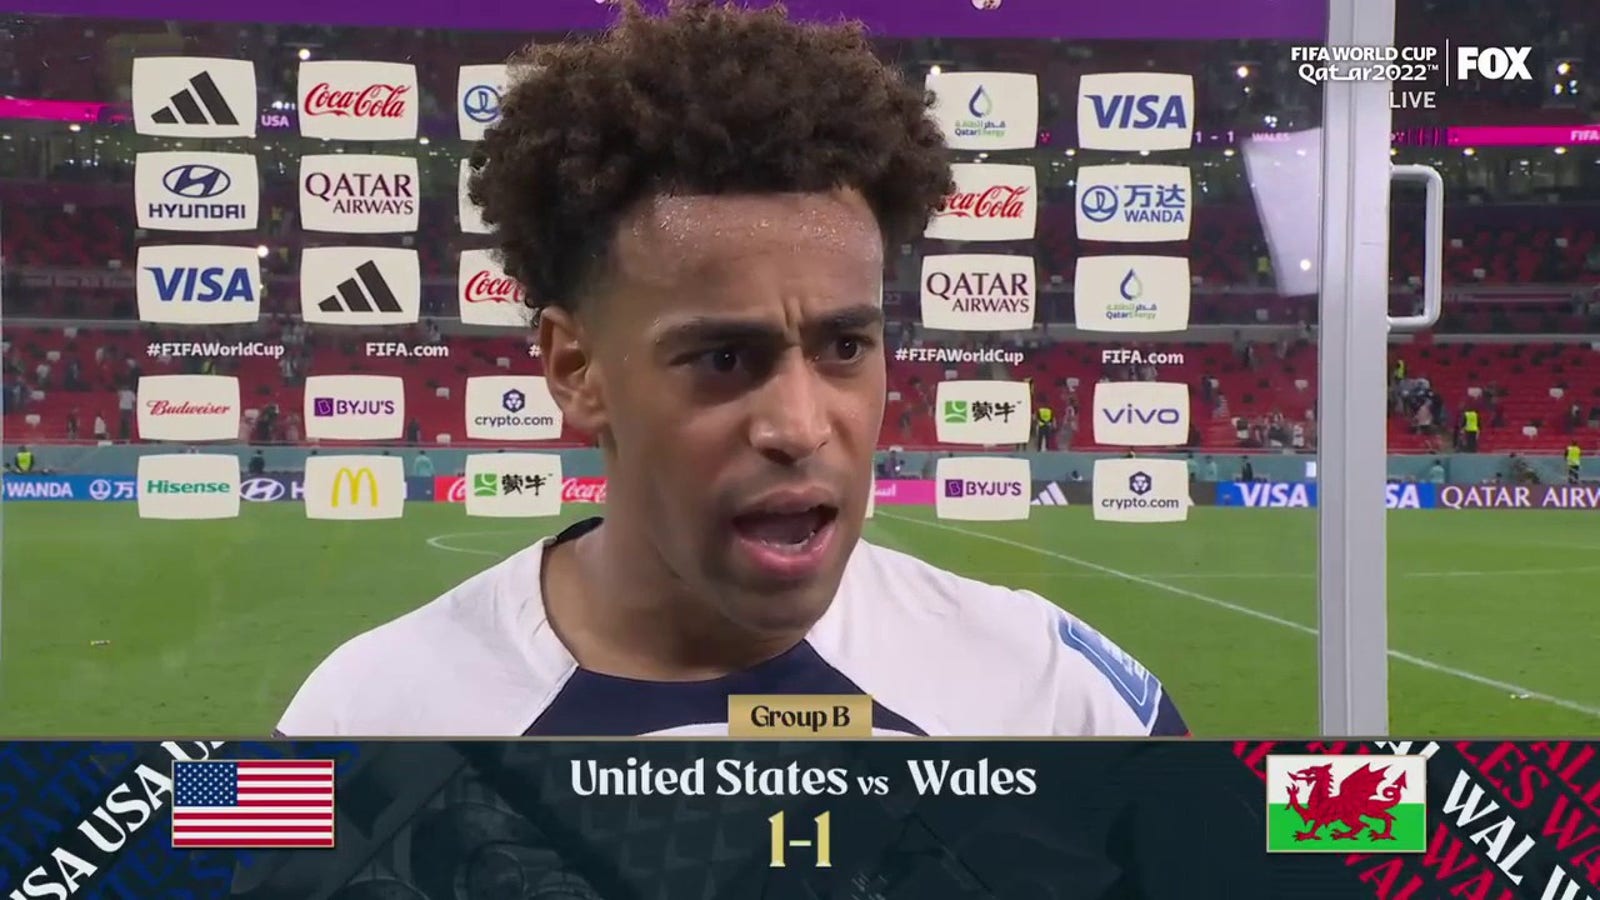 'We have to keep our heads held high!' - Tyler Adams reacts to USMNT's 1-1 draw vs. Wales